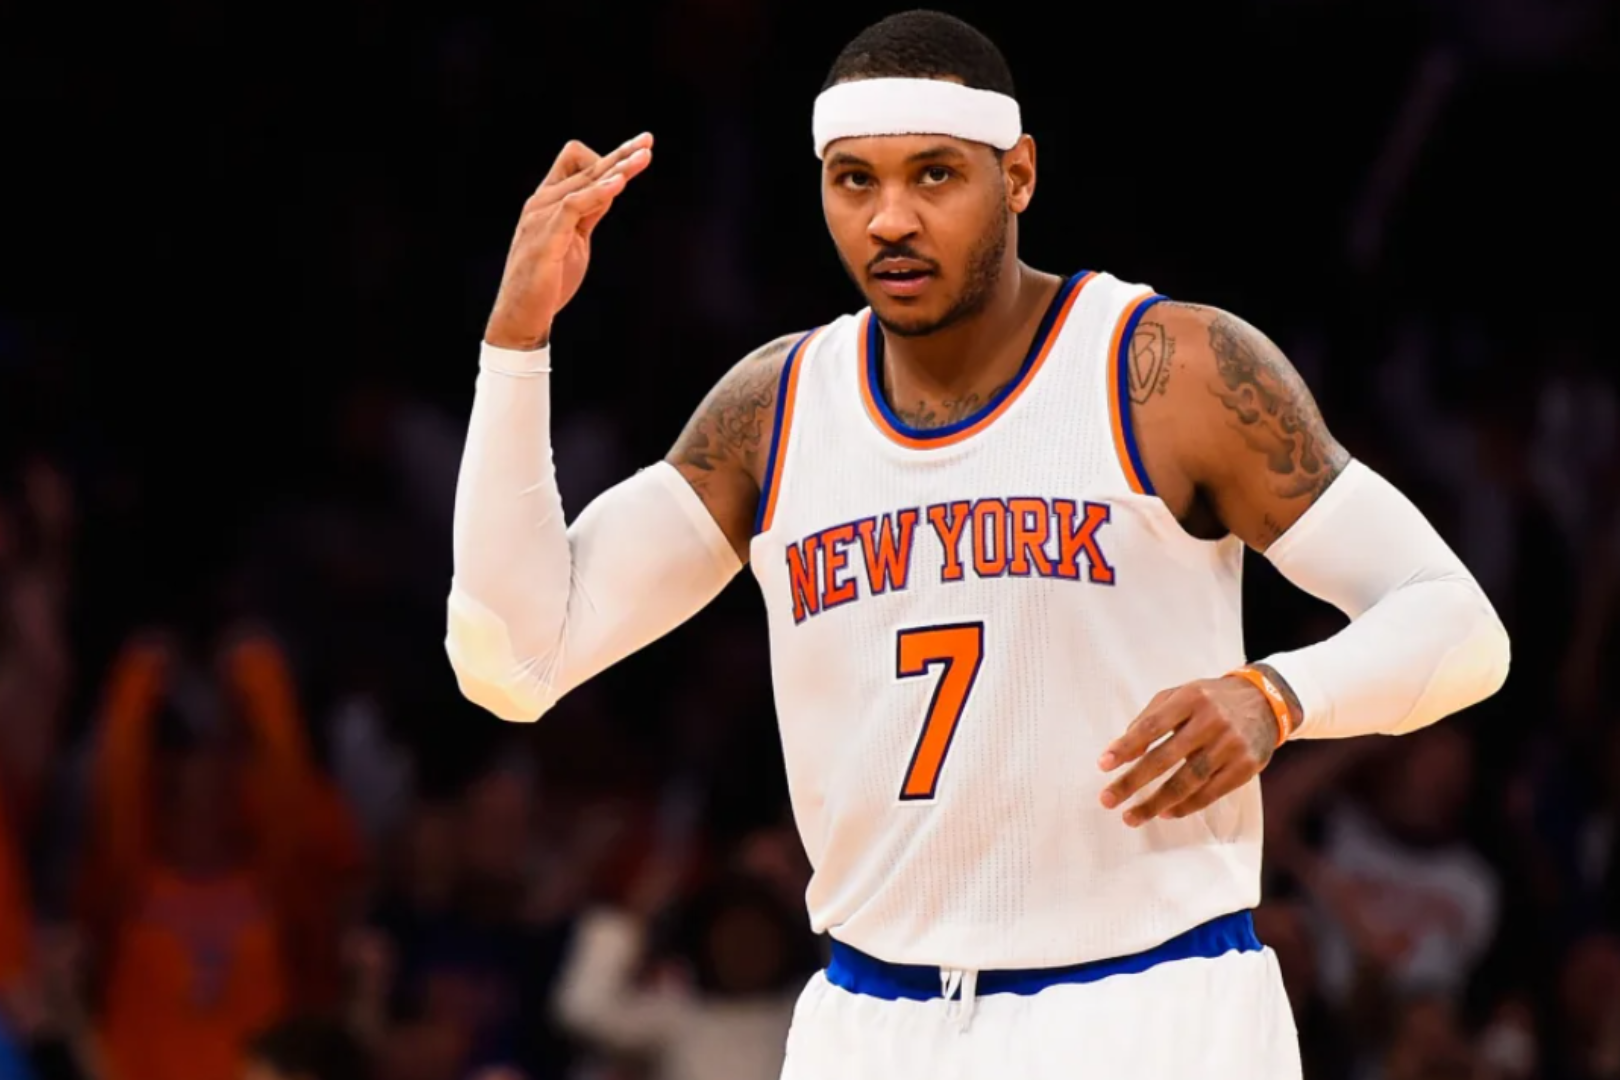 article_img / What is Carmelo Anthony's Net Worth?